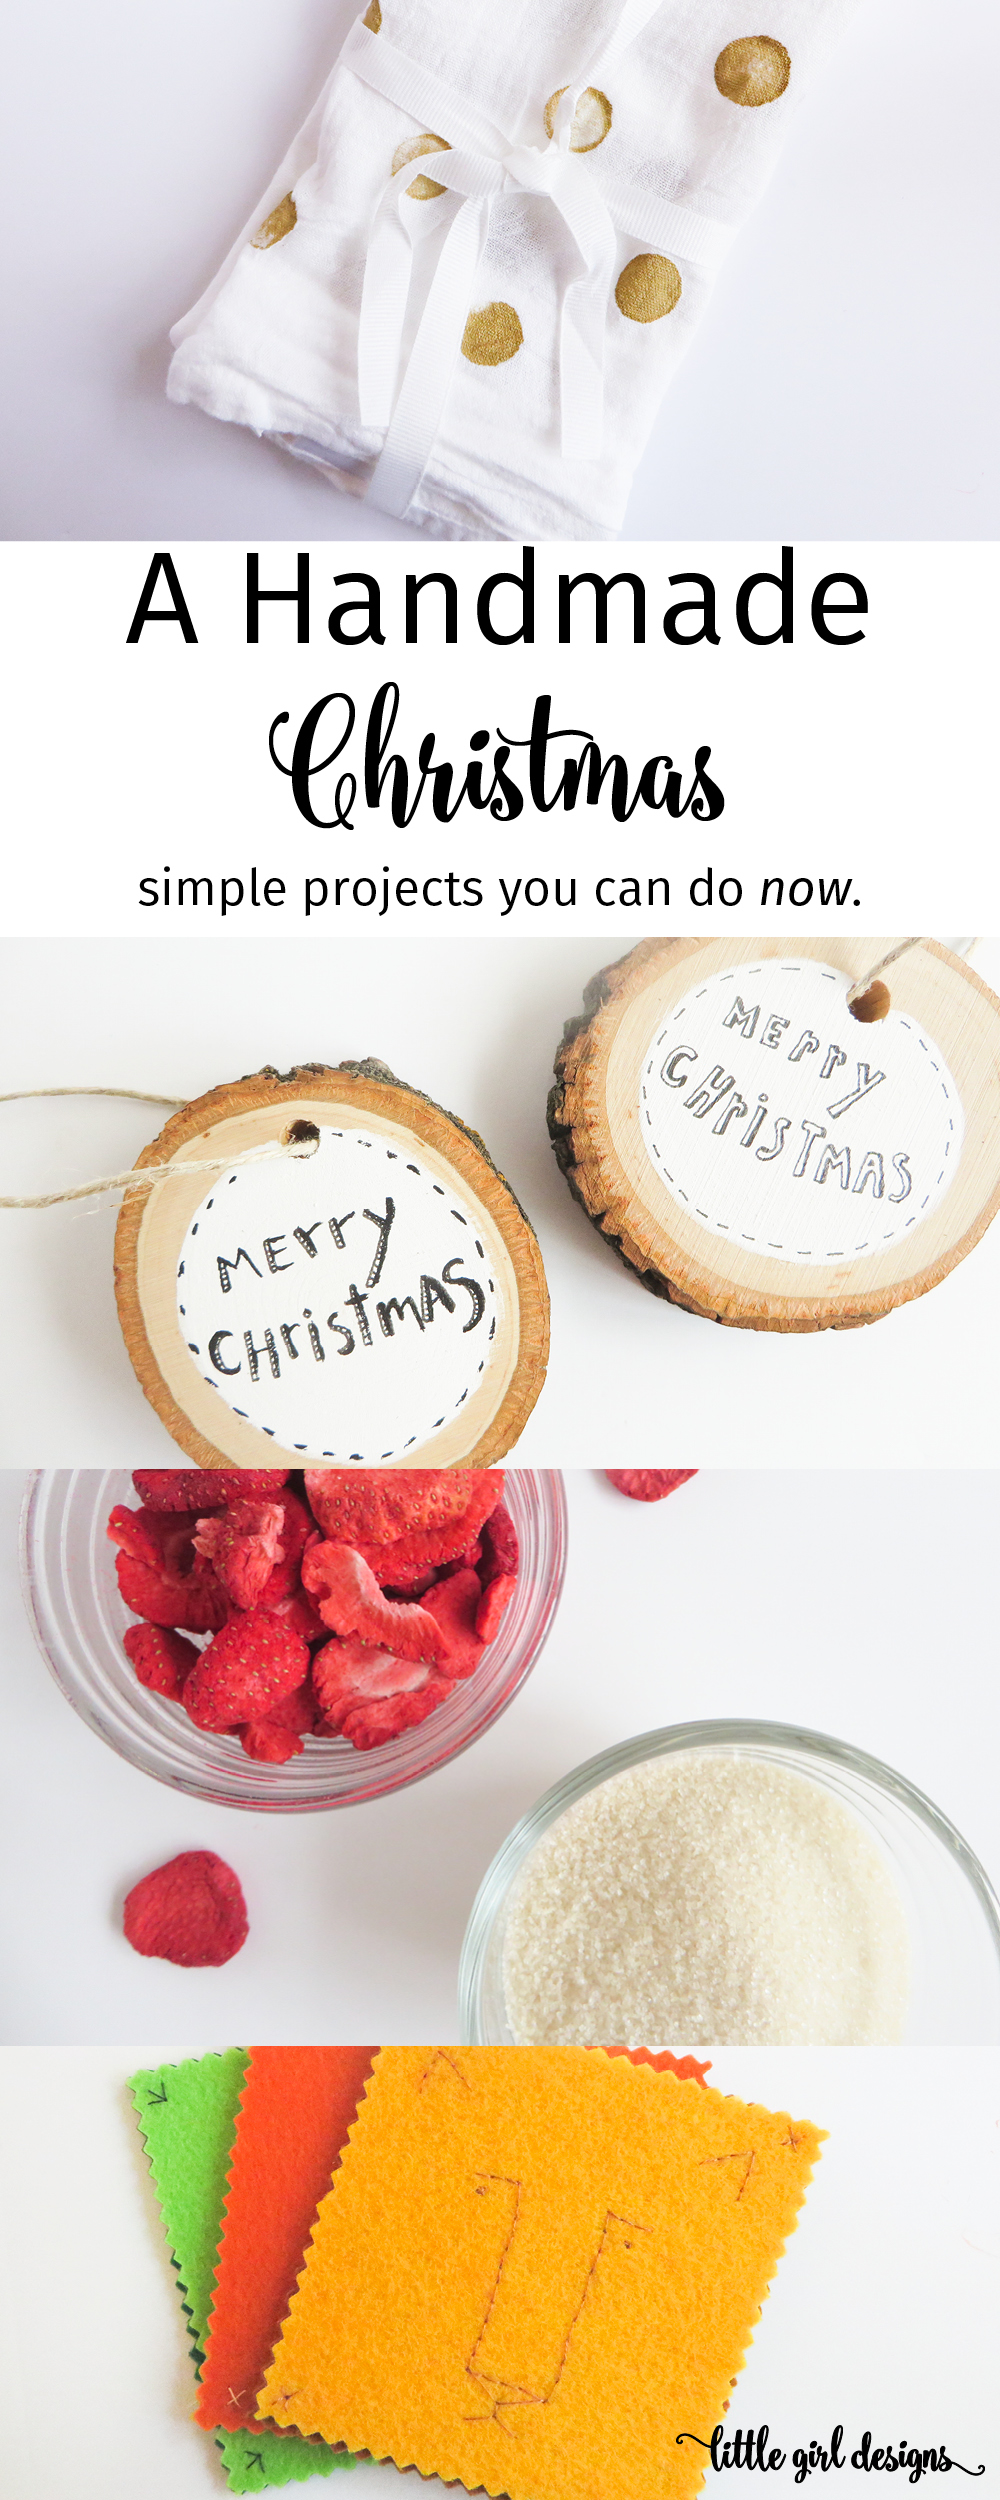 My go-to list of 8 simple handmade gifts to make this year for Christmas. via littlegirldesigns.com